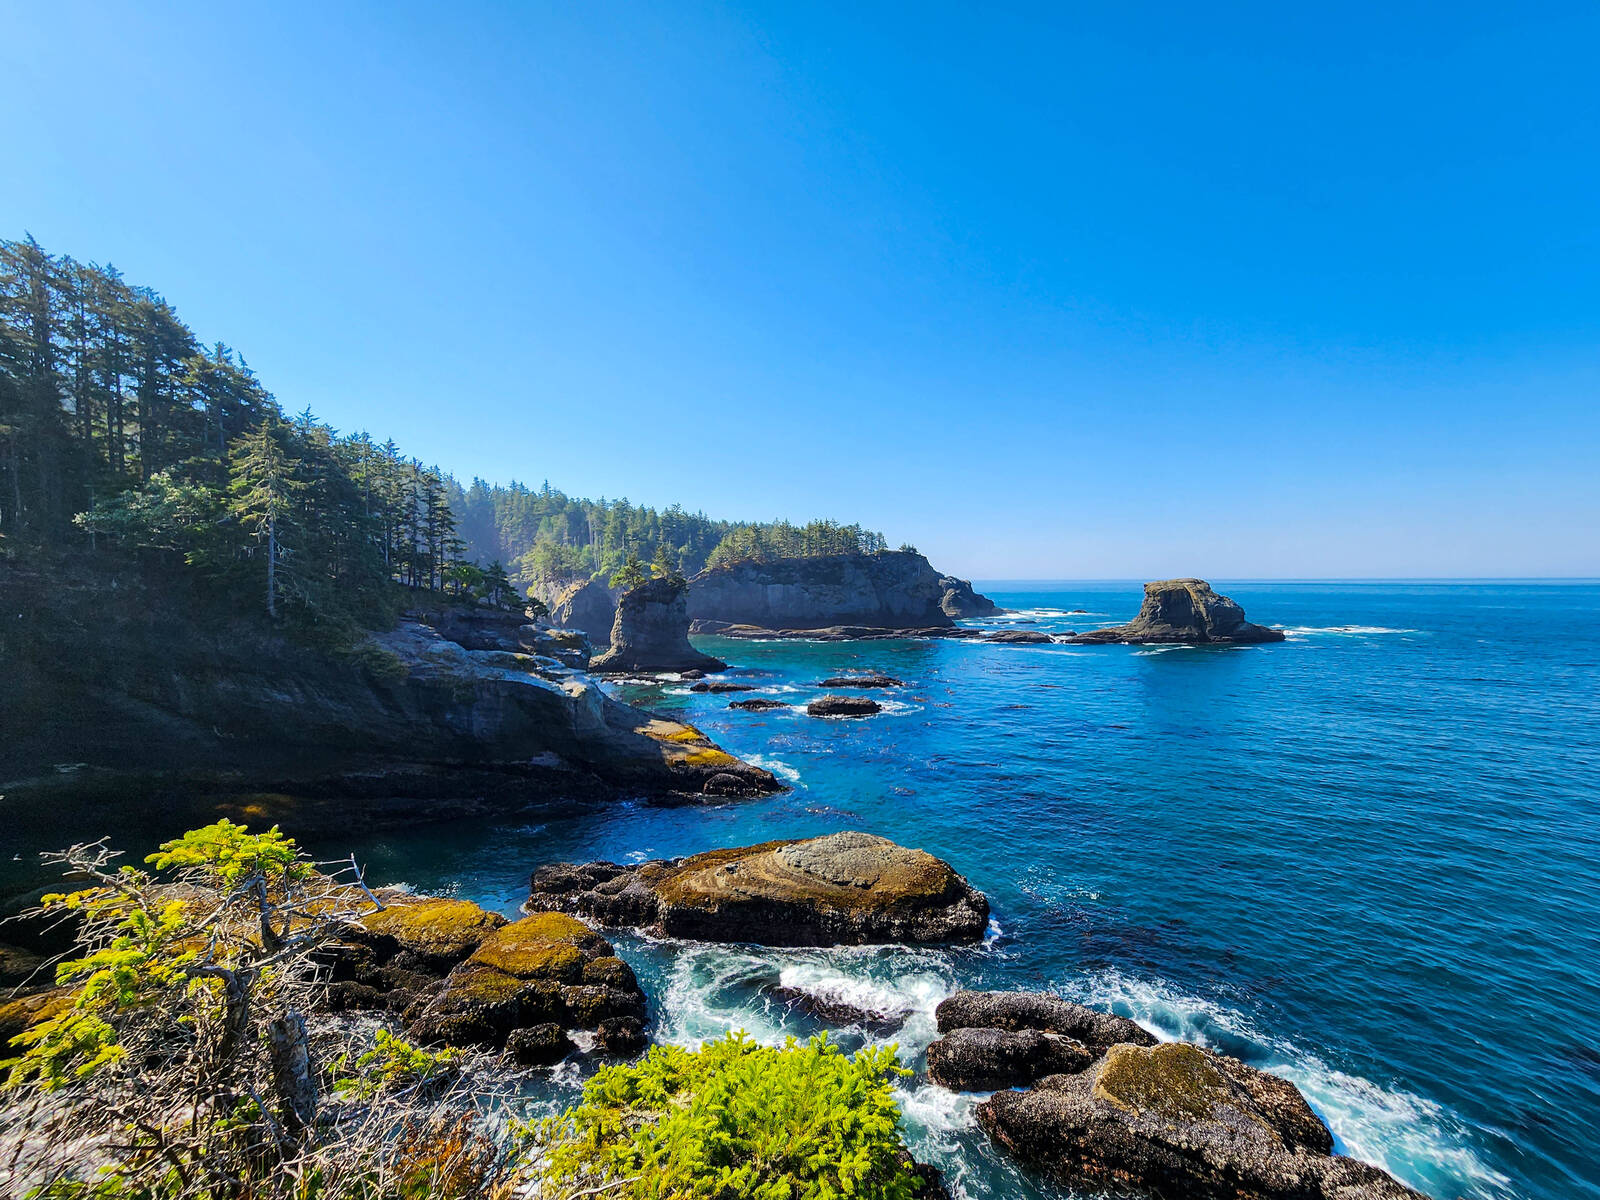 Image of Cape Flattery Viewpoint by Ray Humphreys